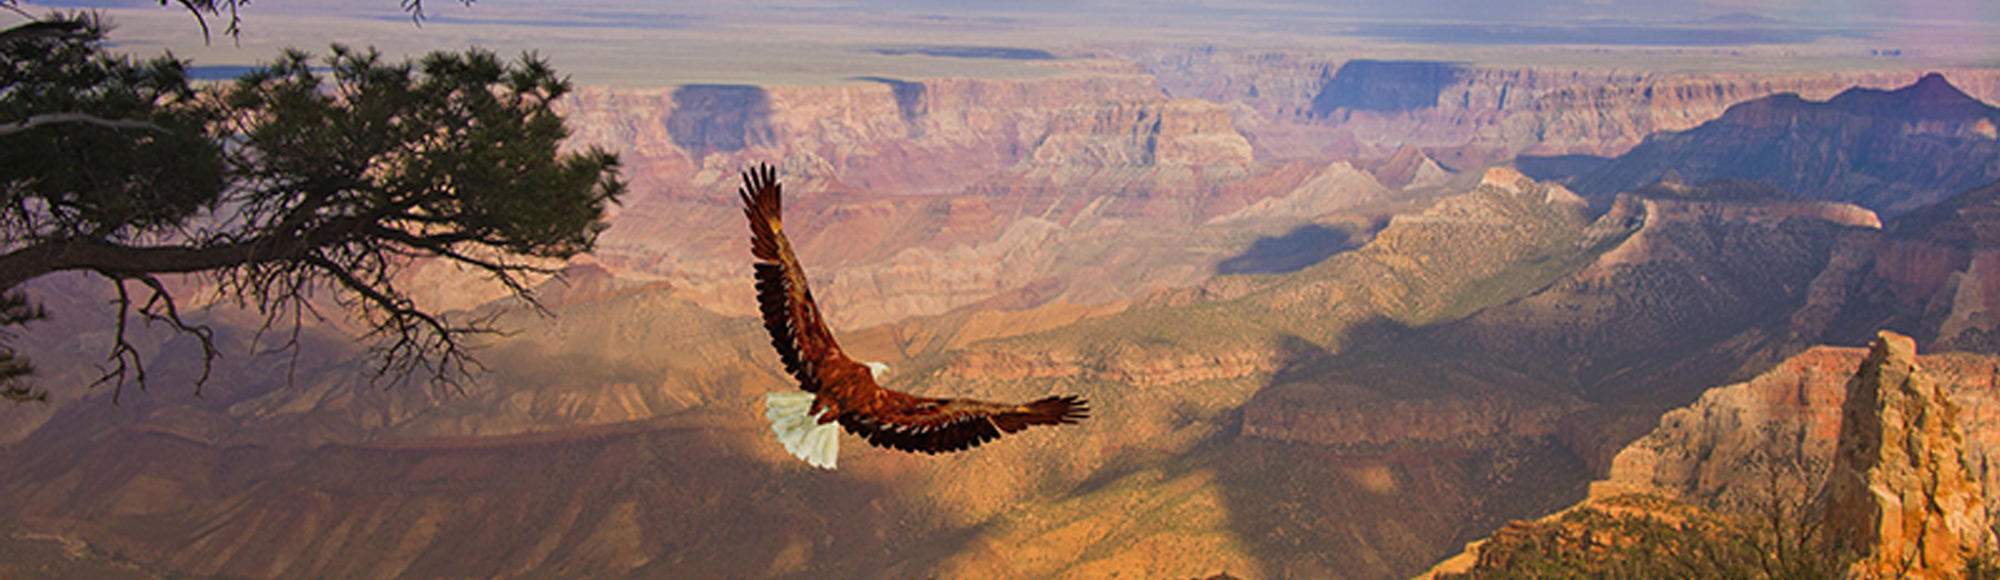 Grand Canyon West Rim and Hoover Dam Photo Stop Bus Tour tour